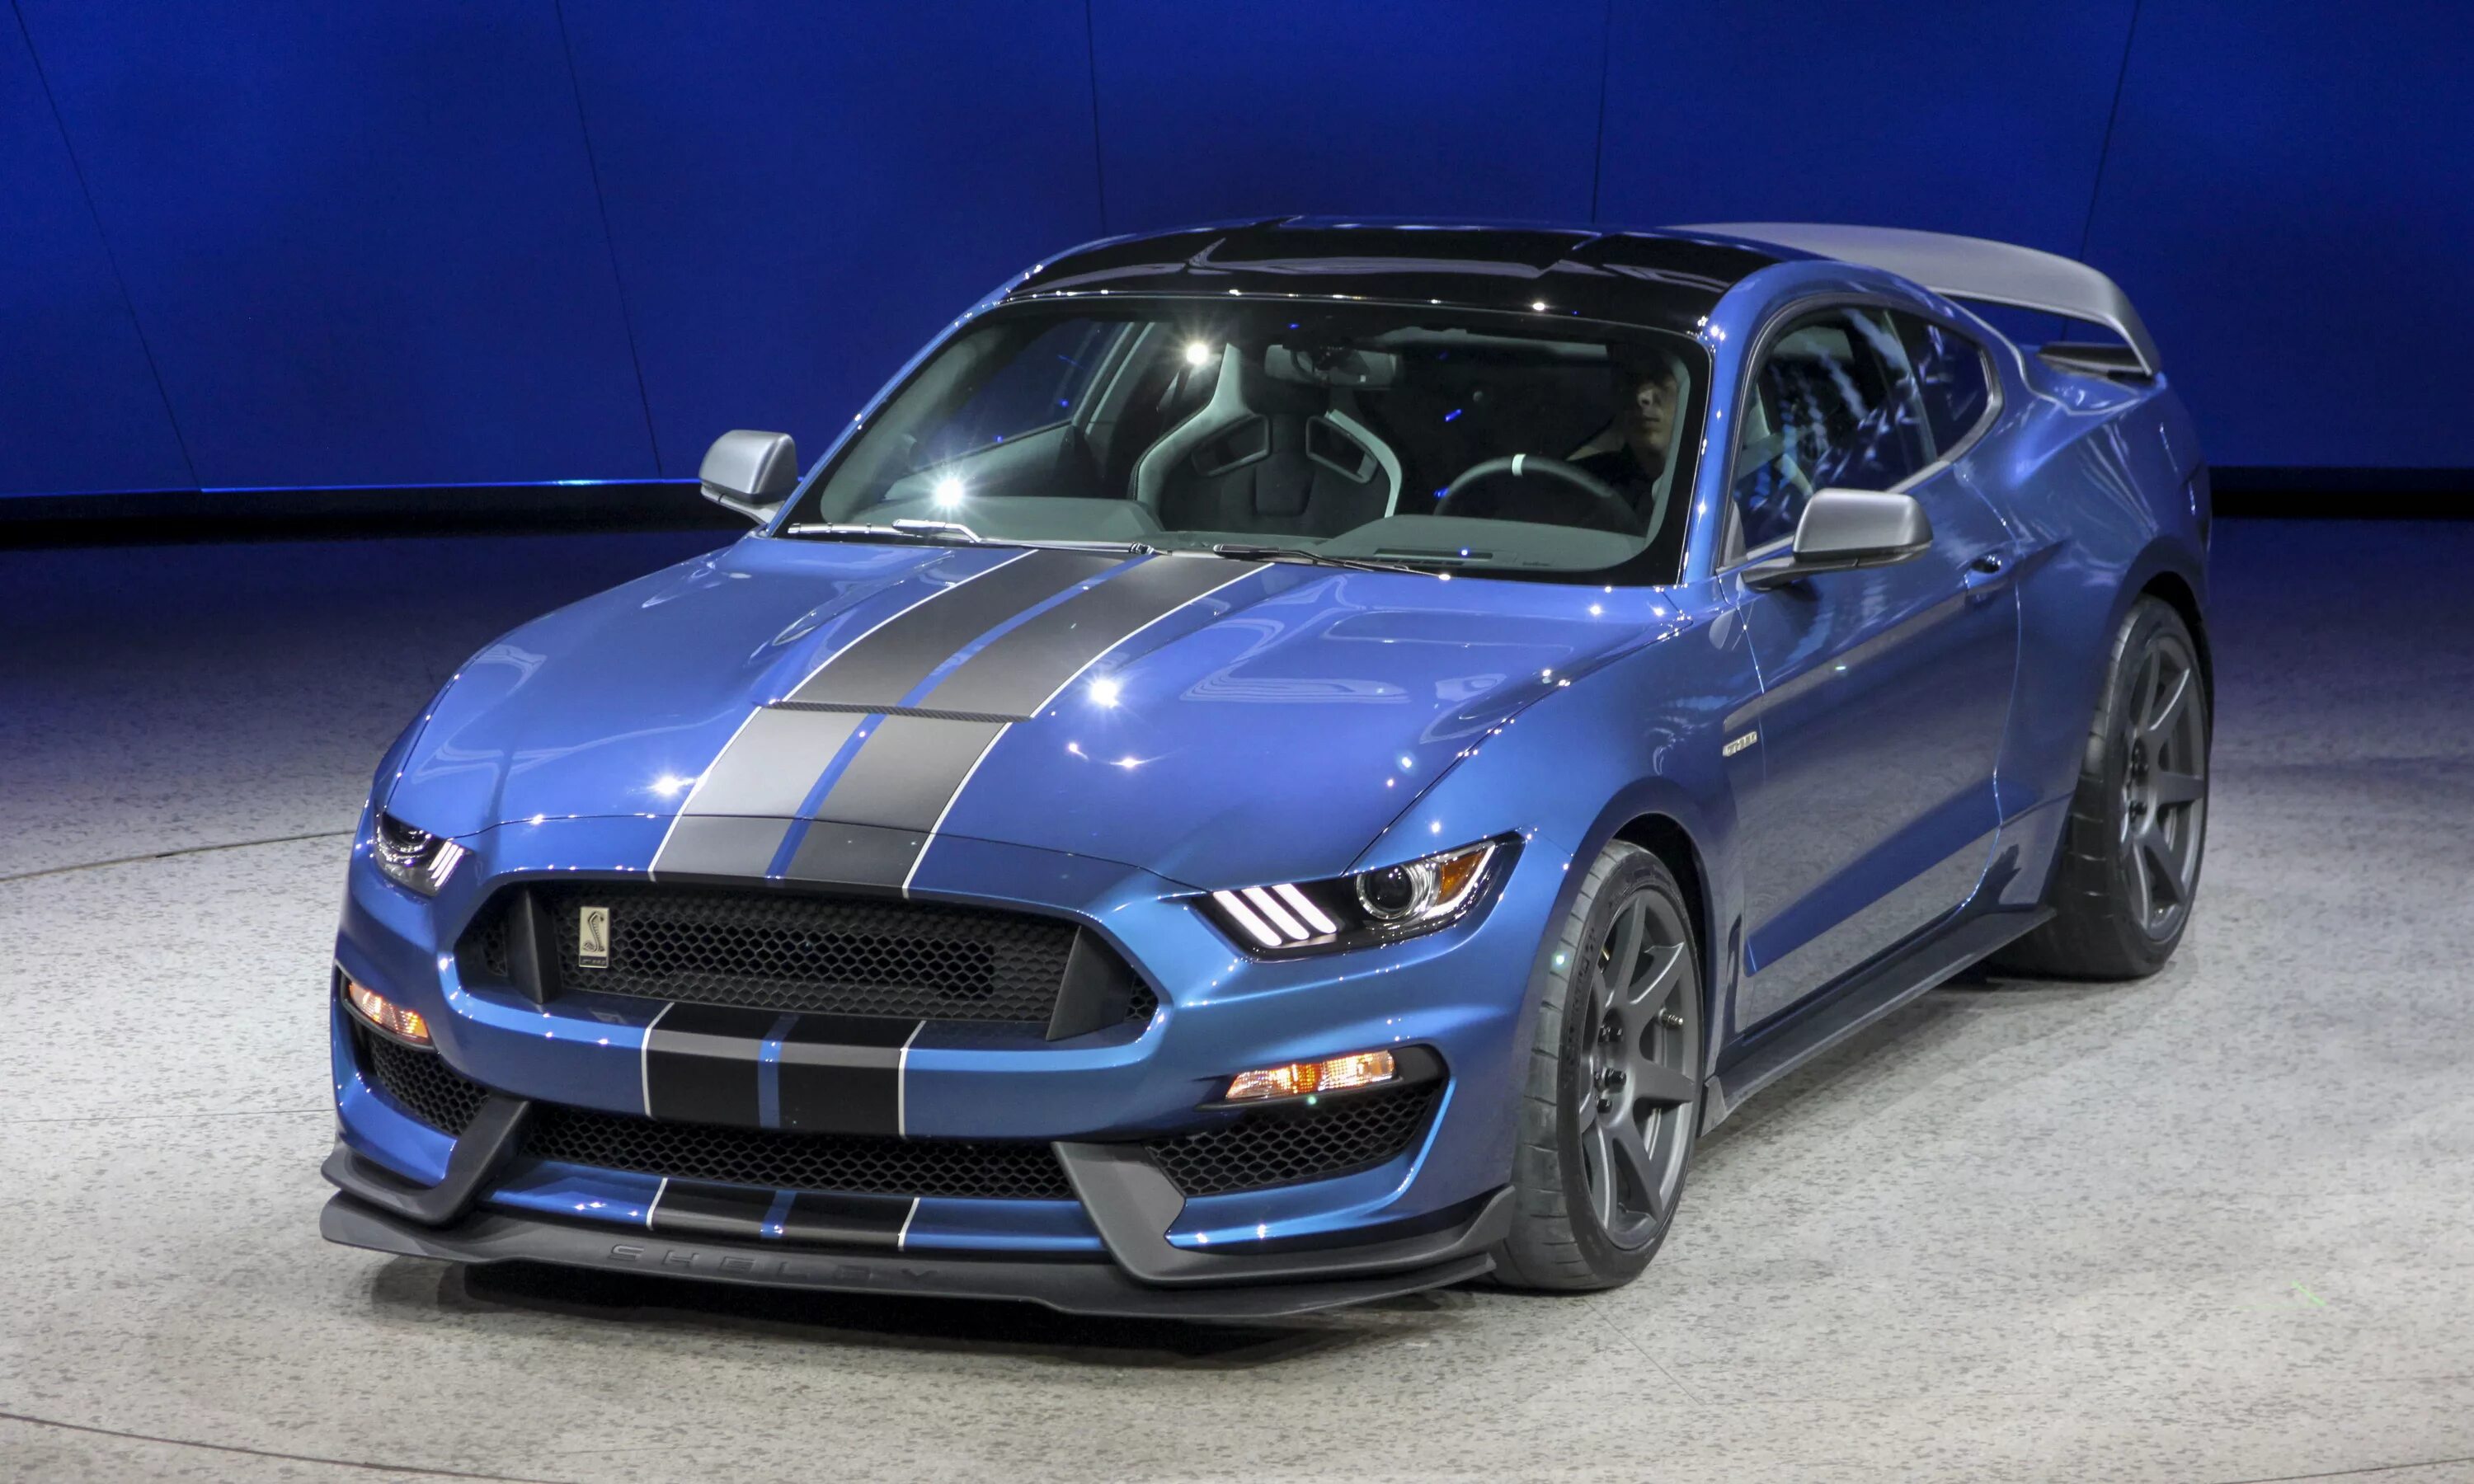 Mustang shelby gt. Форд Мустанг Shelby gt350r. Форд Мустанг Шелби gt 350 r. Ford Mustang Shelby gt350. Ford Mustang Shelby gt350r 2016.